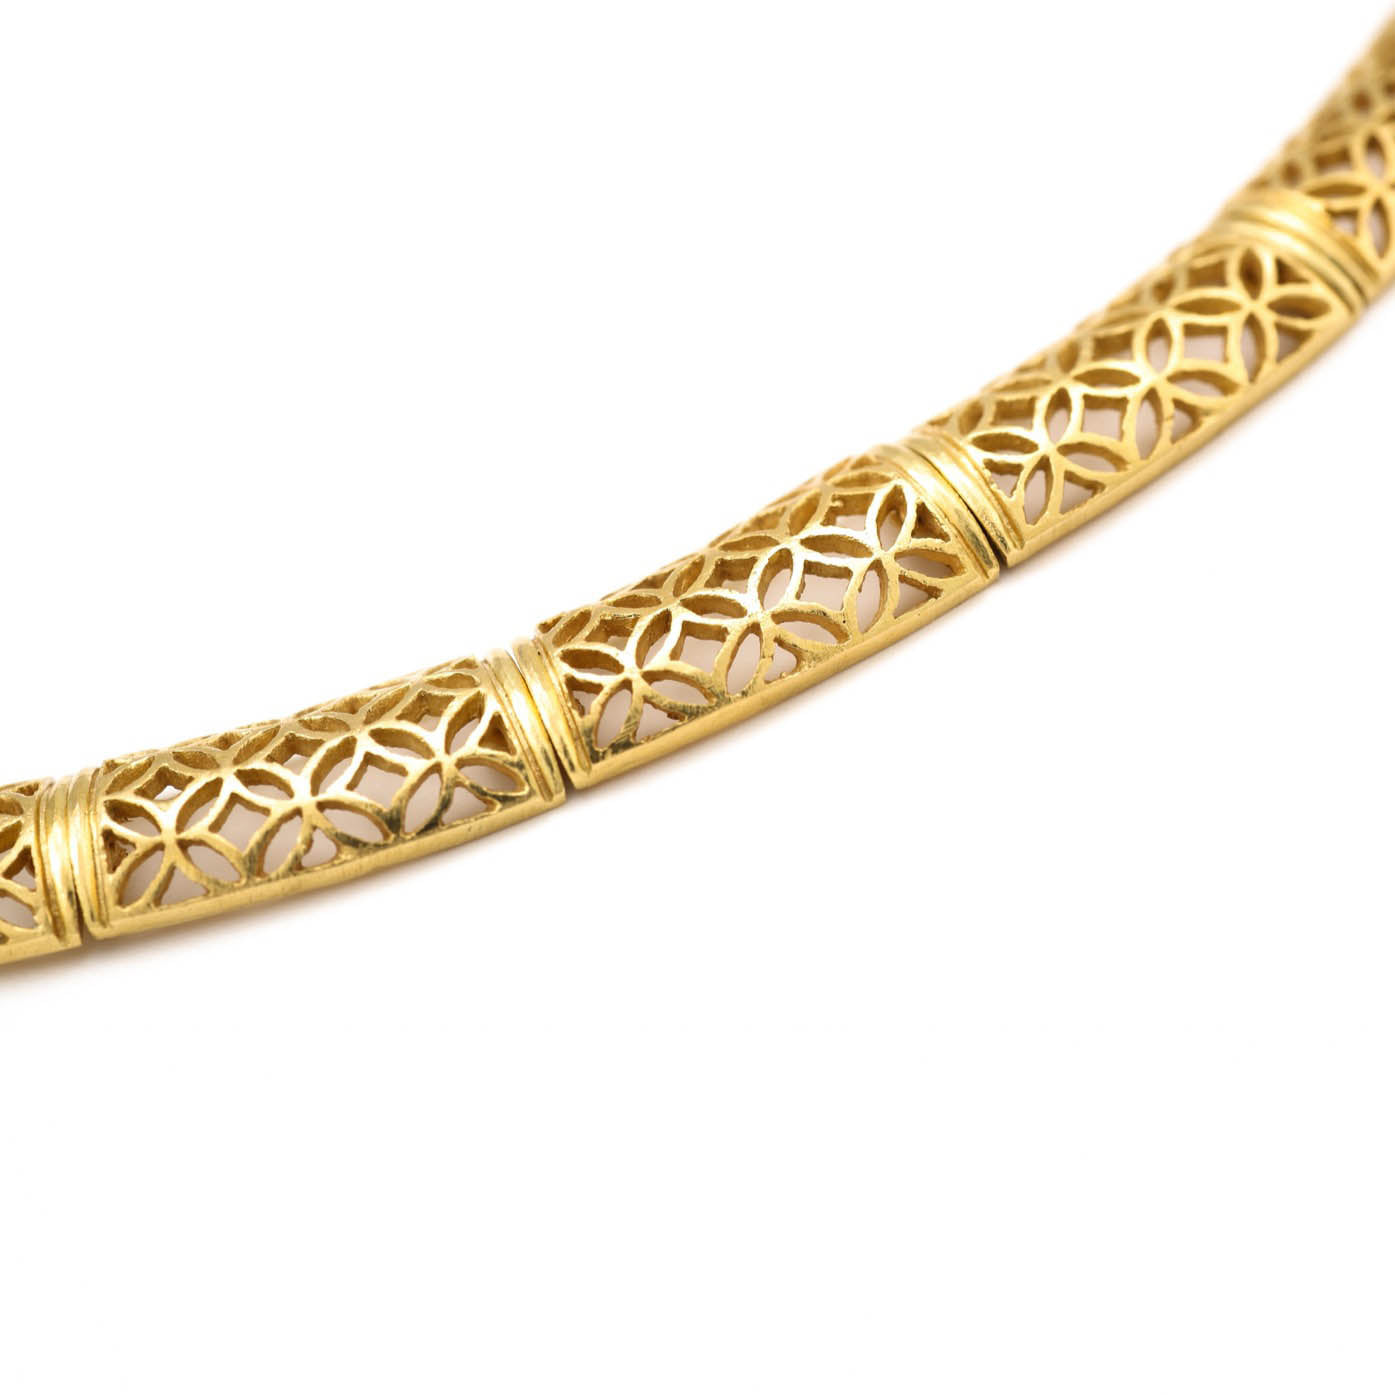 The Indrakanta Lace Series Gold Necklace by Rasvihar